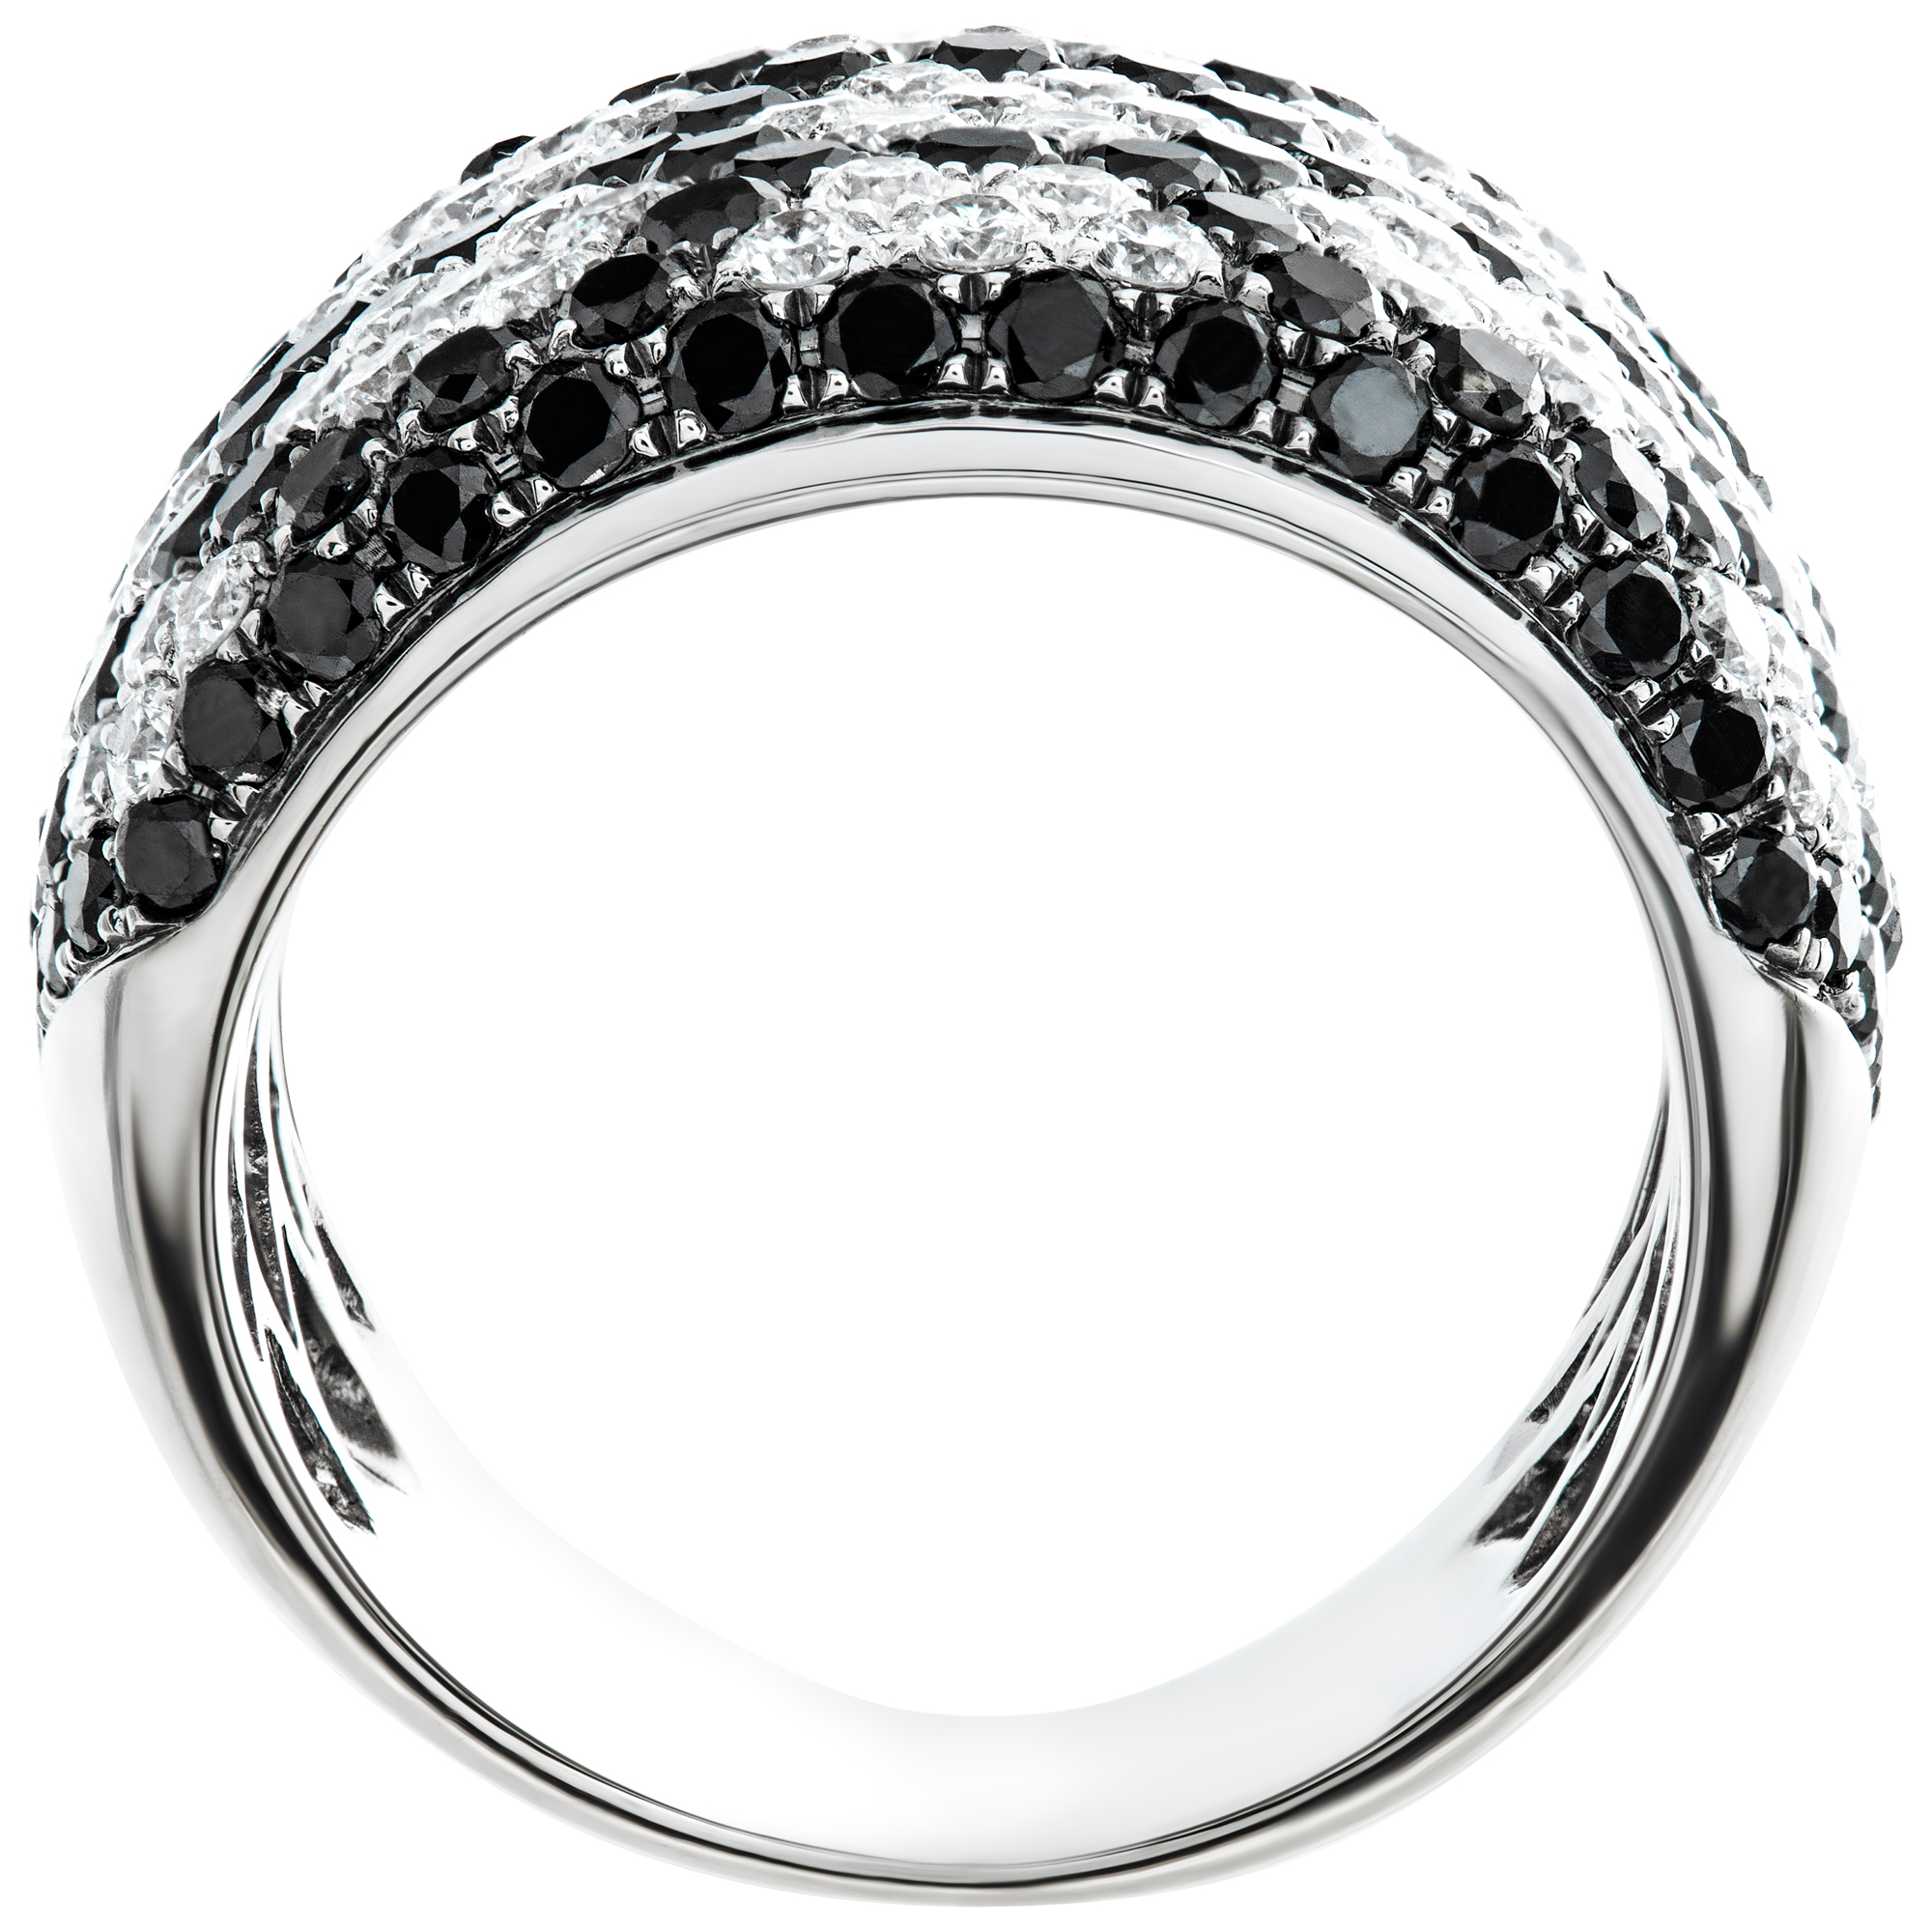 White & black diamonds ring set in 18K white gold. Total diamonds approx weight 3.00 carats Size 5. image 4